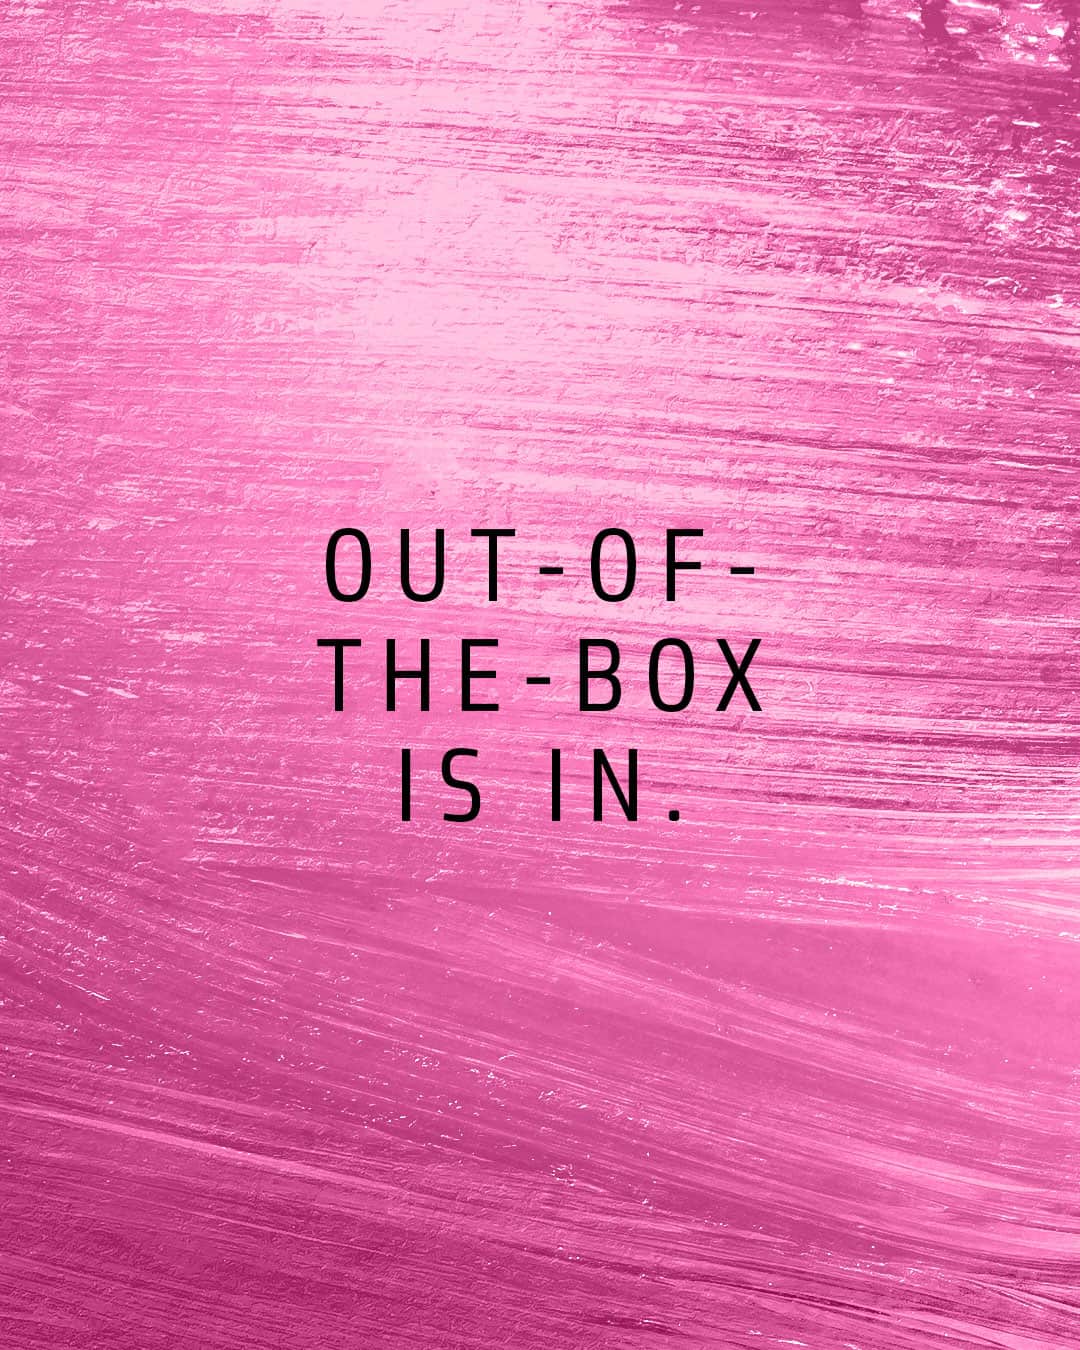 Text on pink background reading "Out of the box is in".